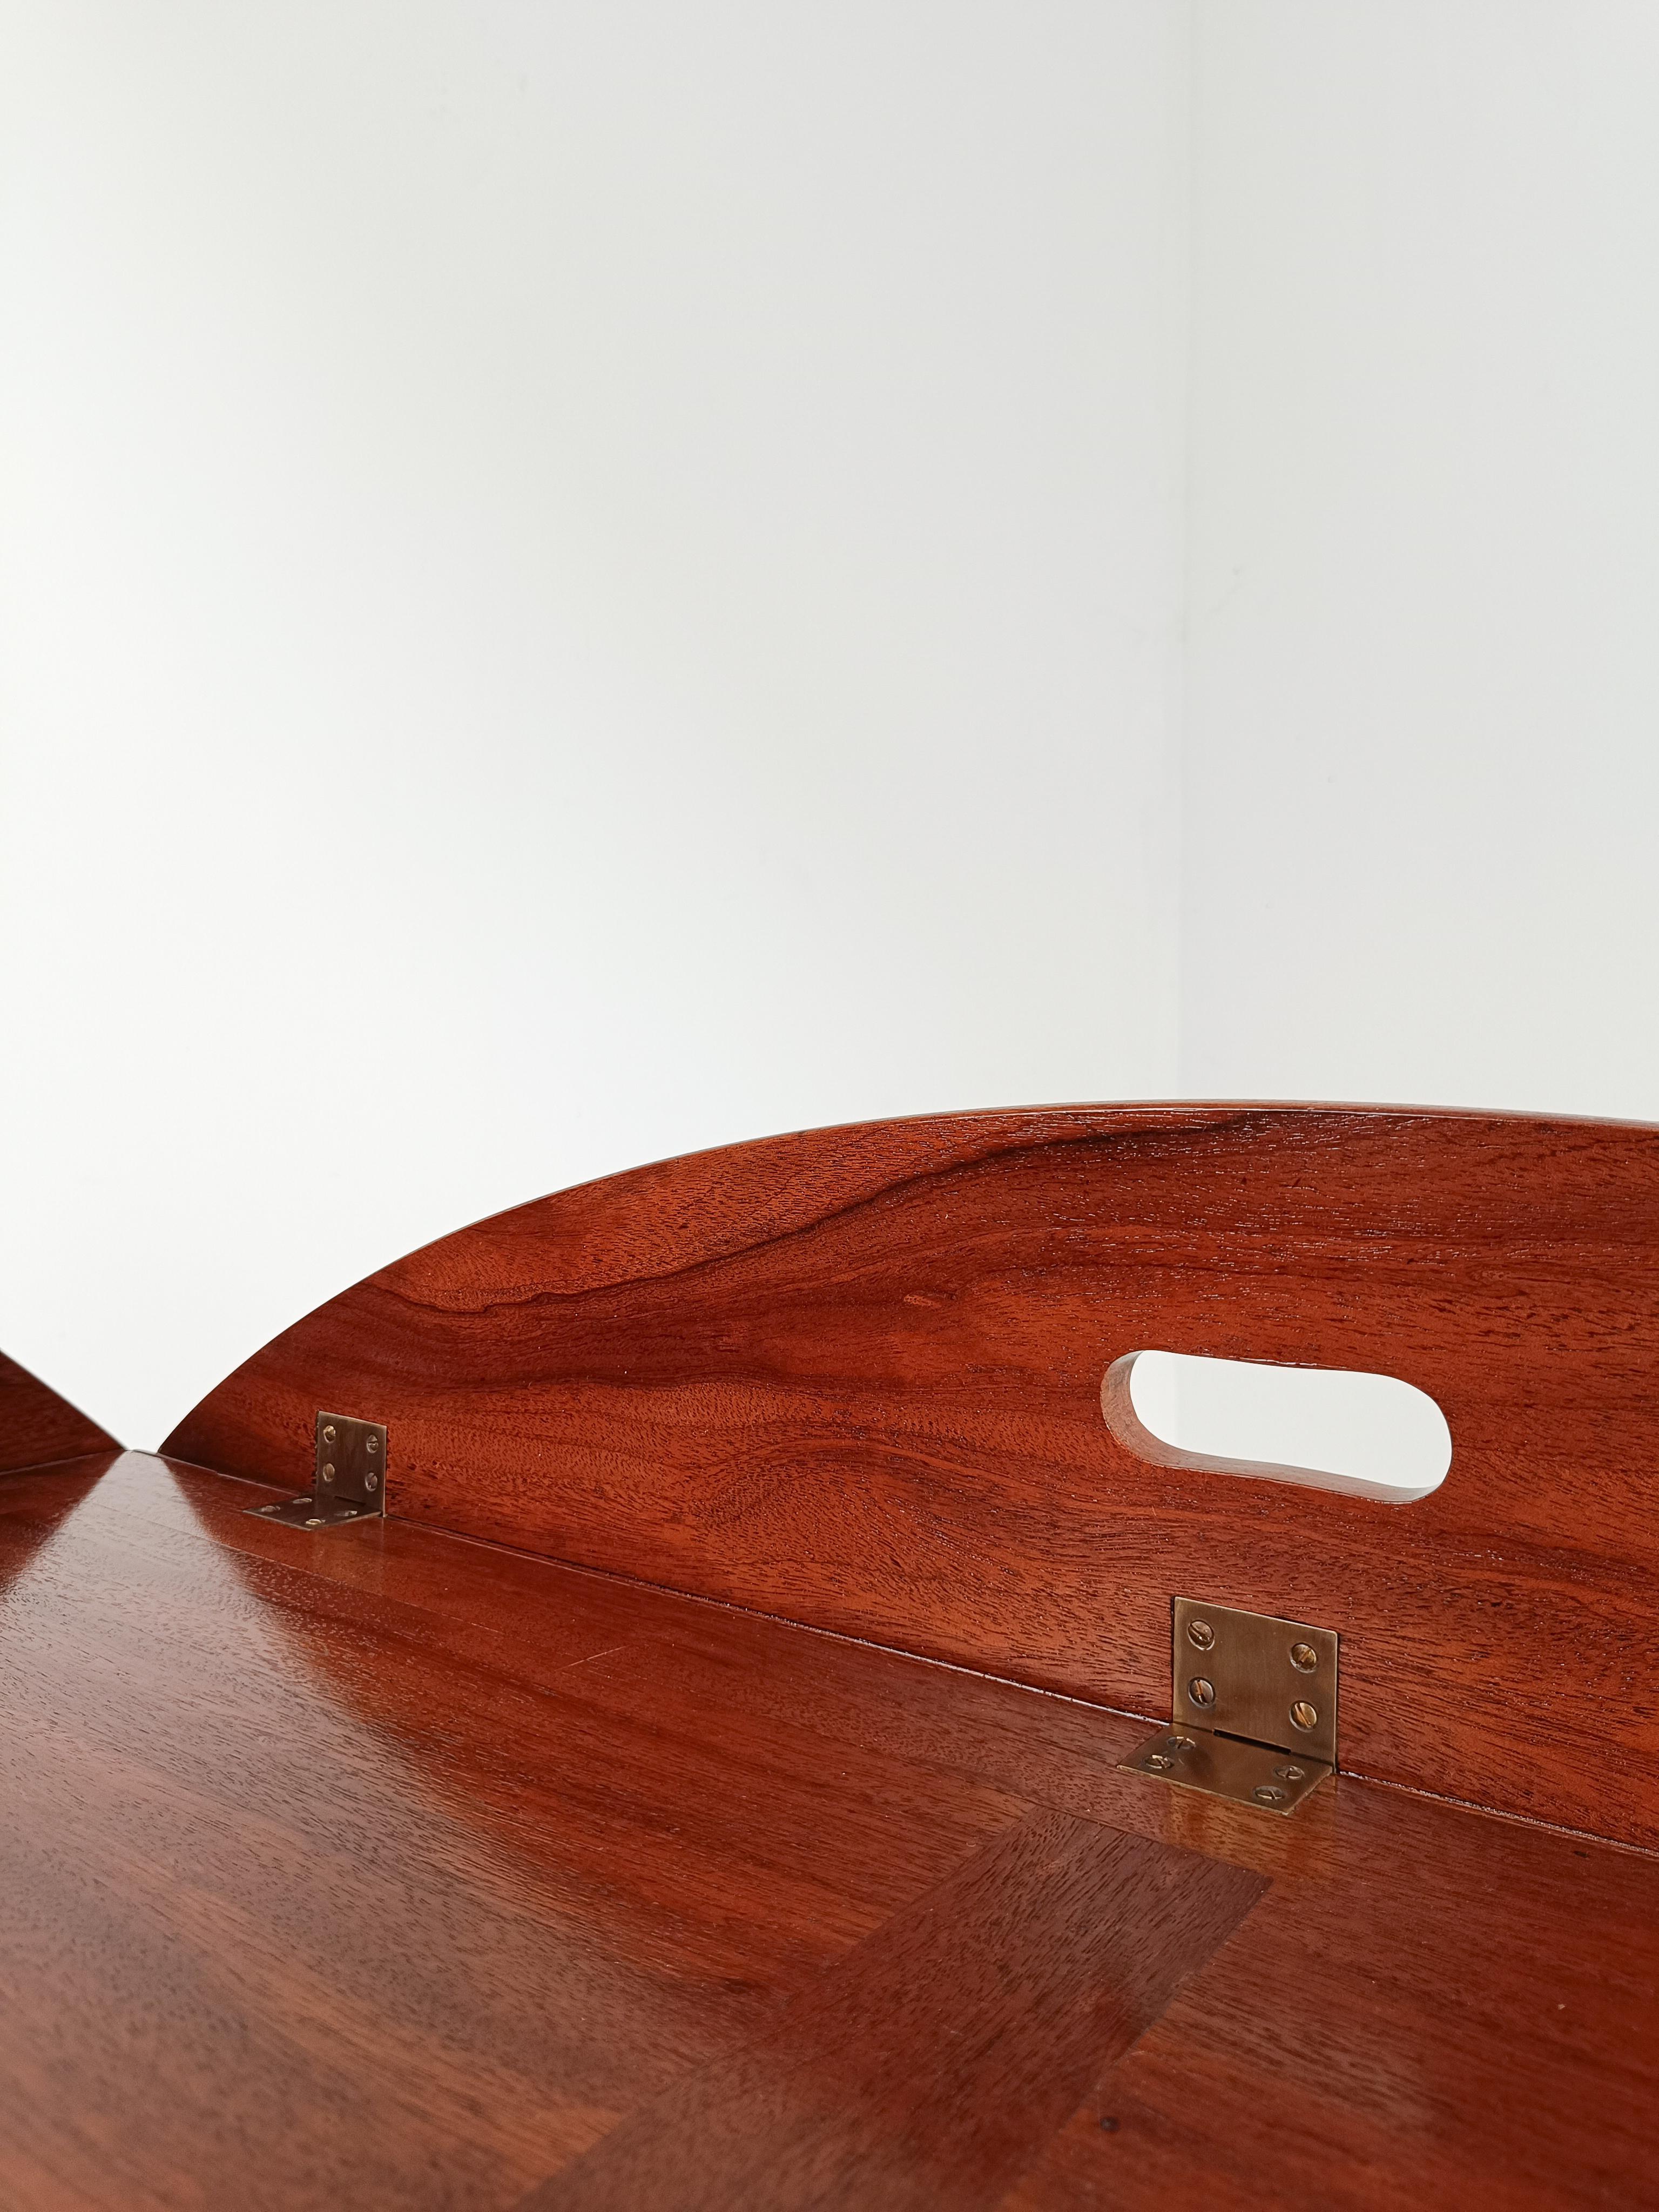 Vintage Oval Mahogany Butler's Coffee Tray Table in Georgian-style, Circa 1960s For Sale 7